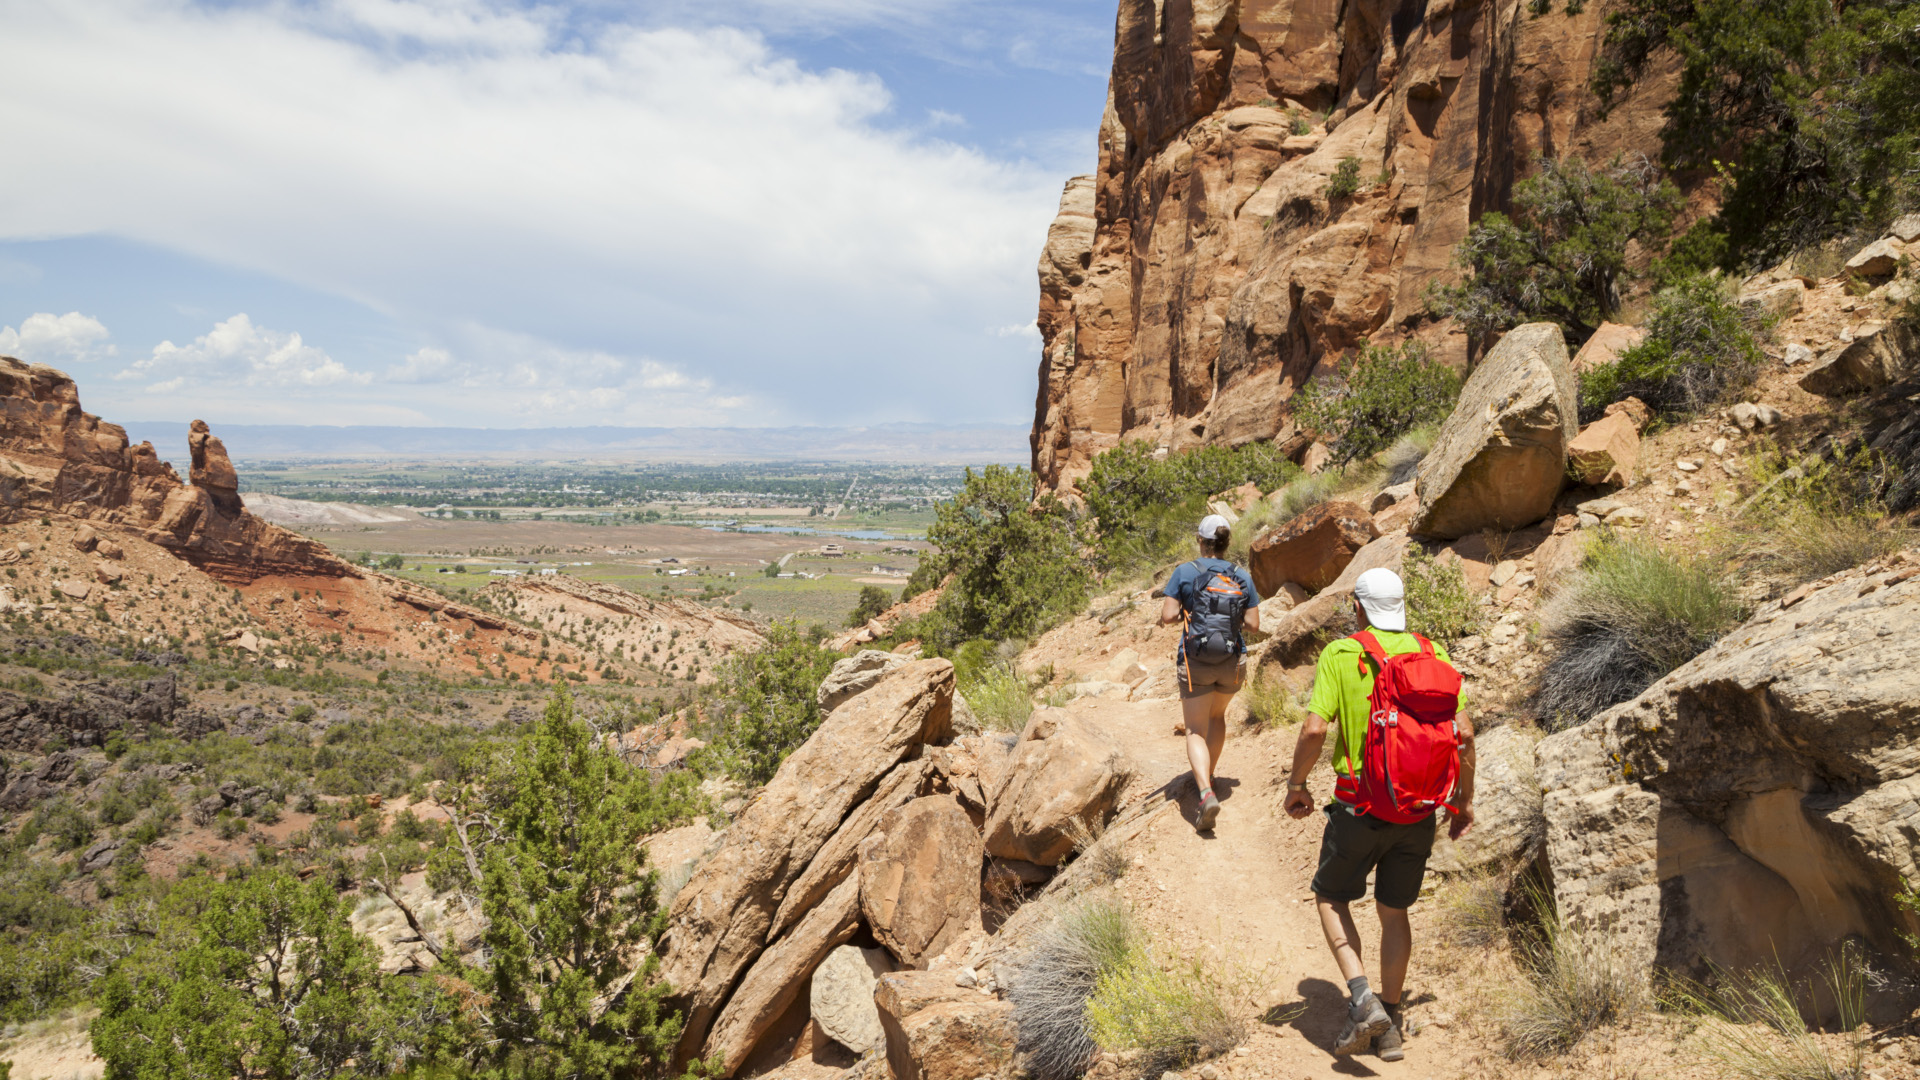 Is hiking a sport? We put this common question to rest